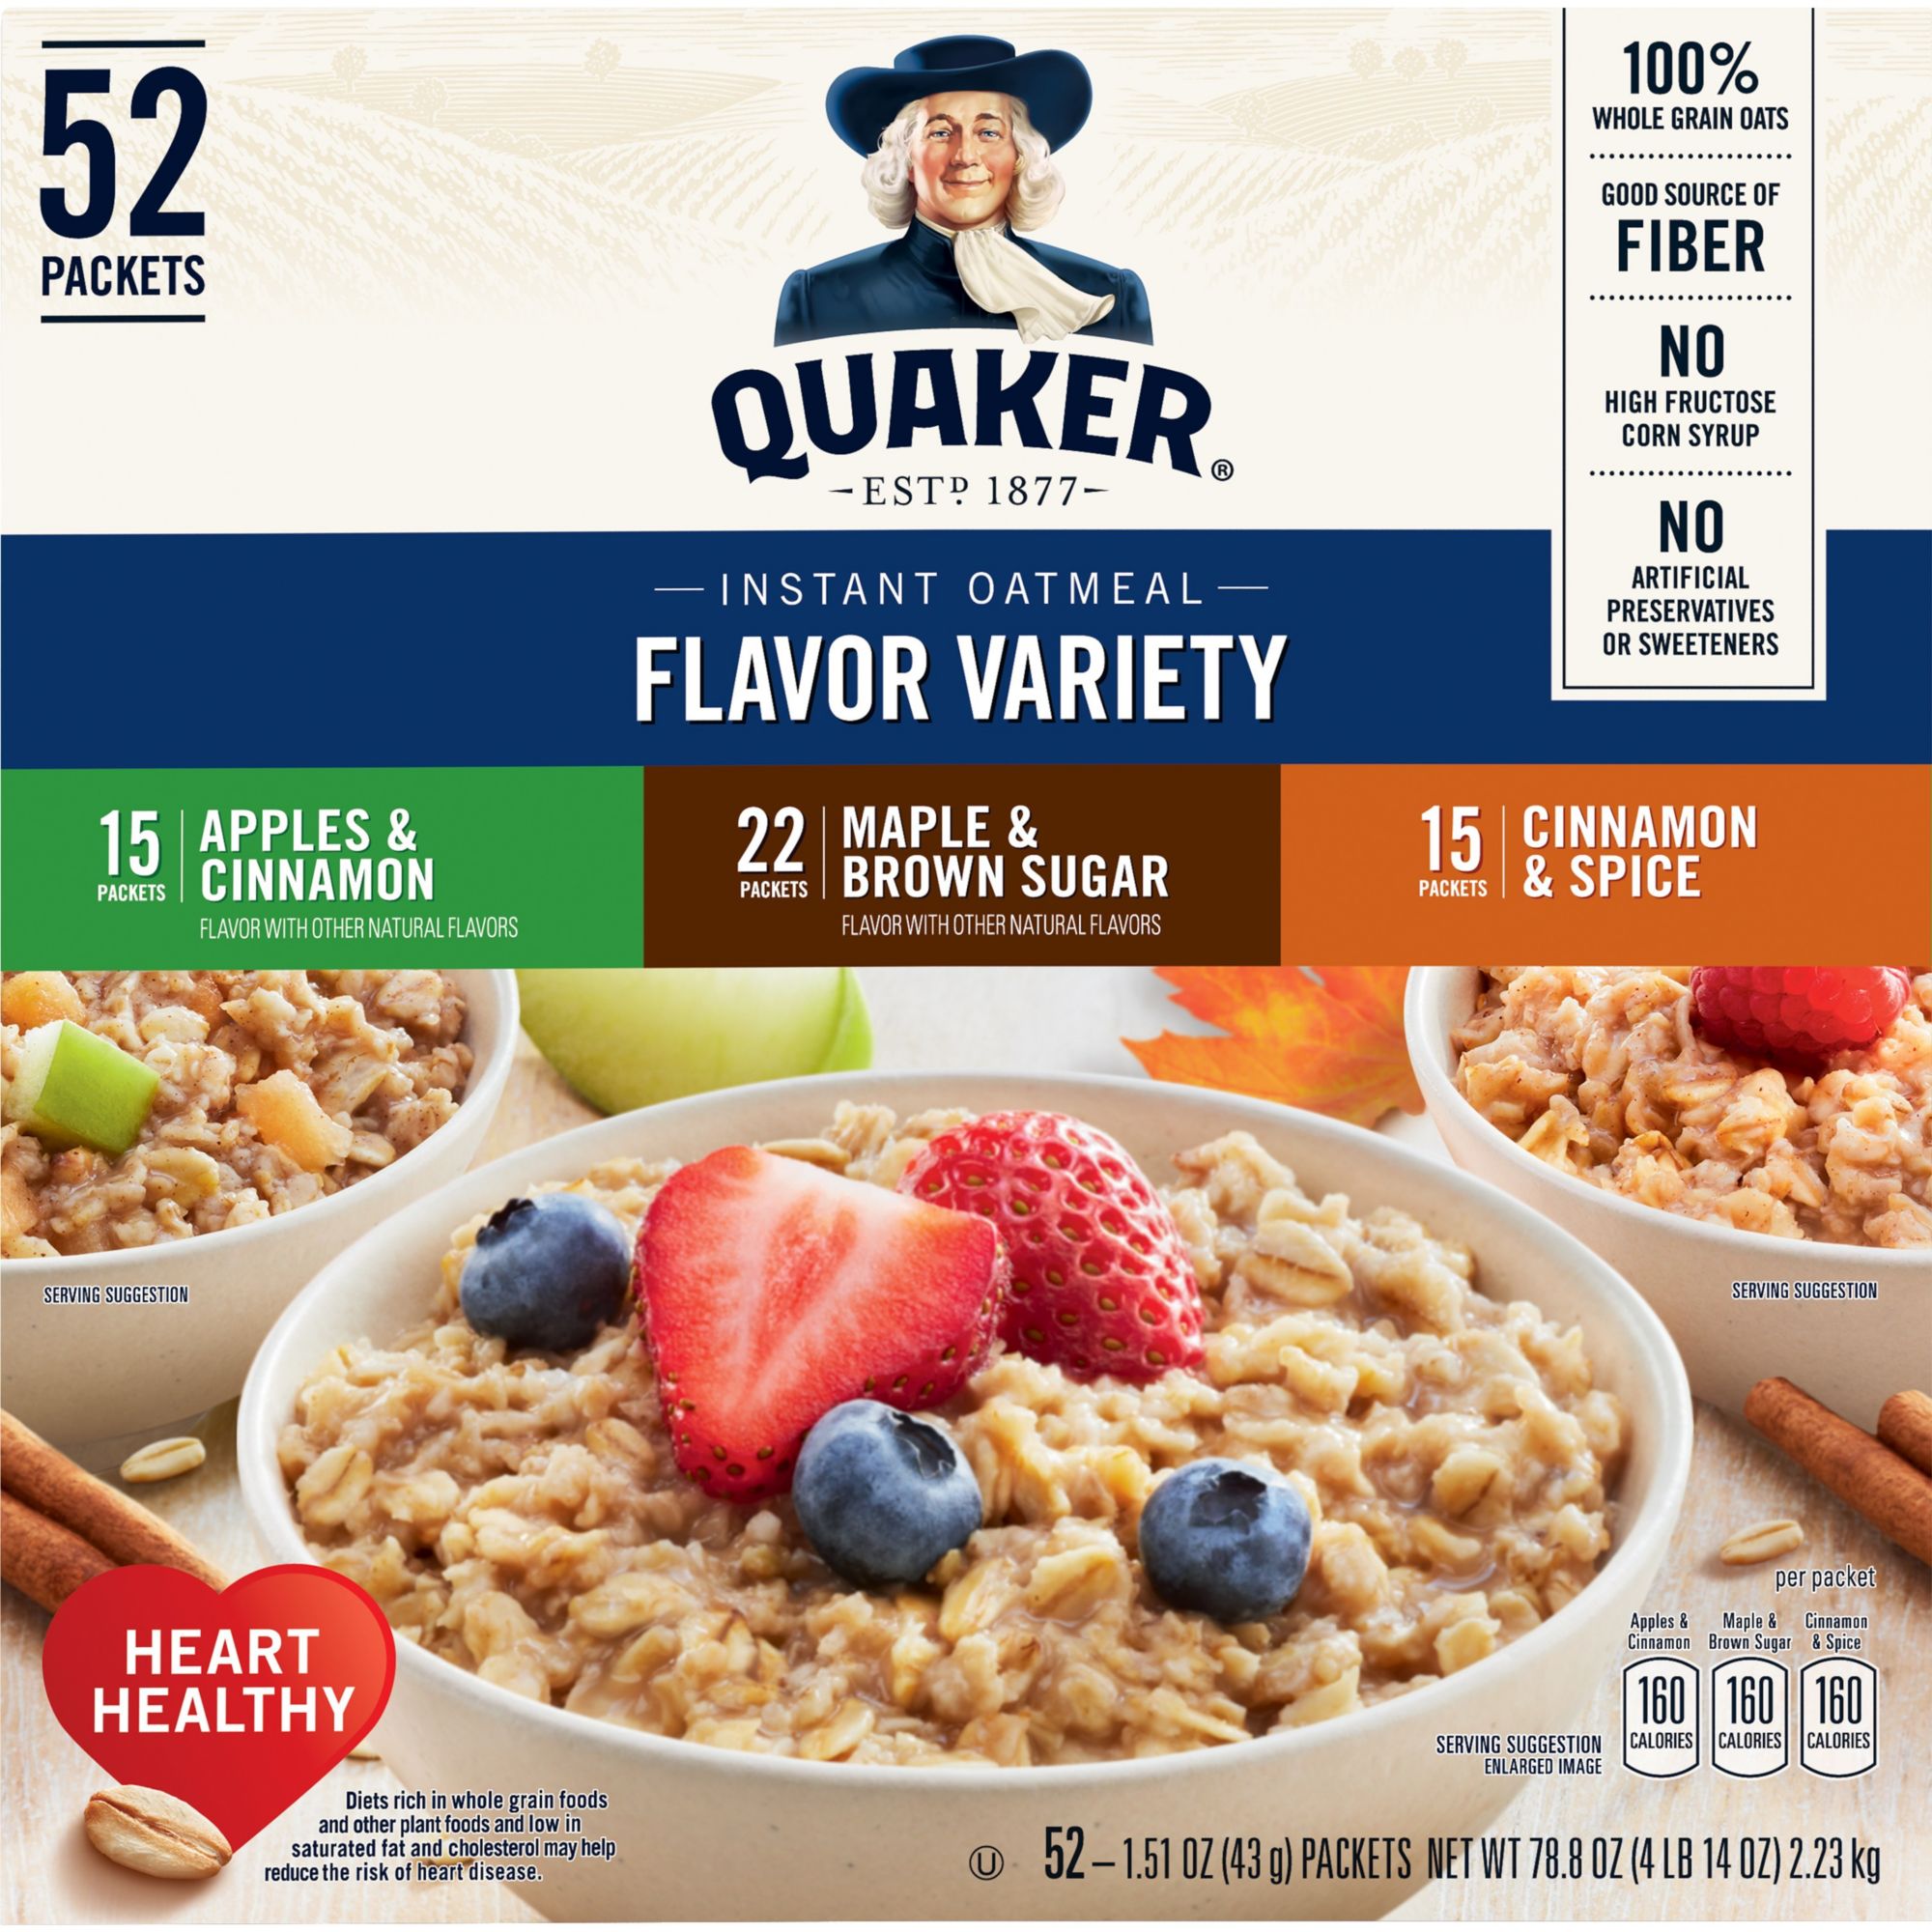 Oatmeal and Granola | BJ's Wholesale Club